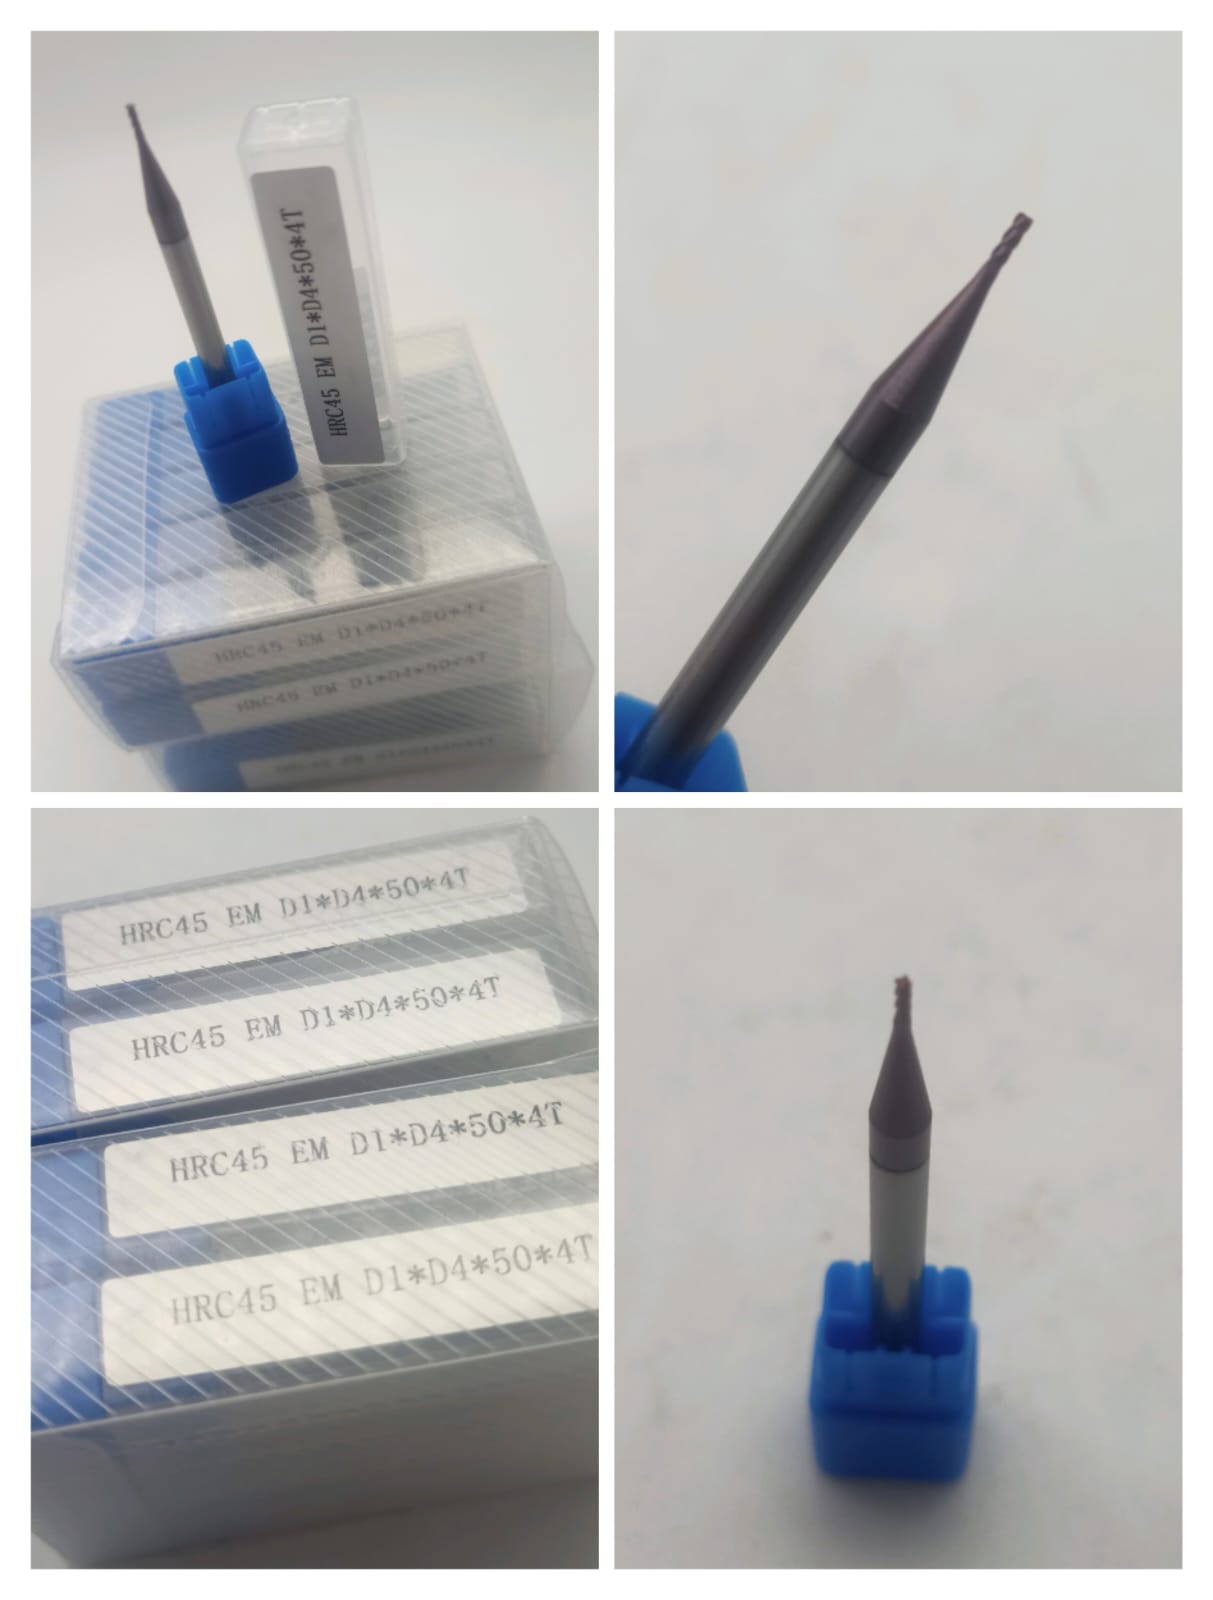 1 mm endmill 4 mm shank 50 long pack of 20